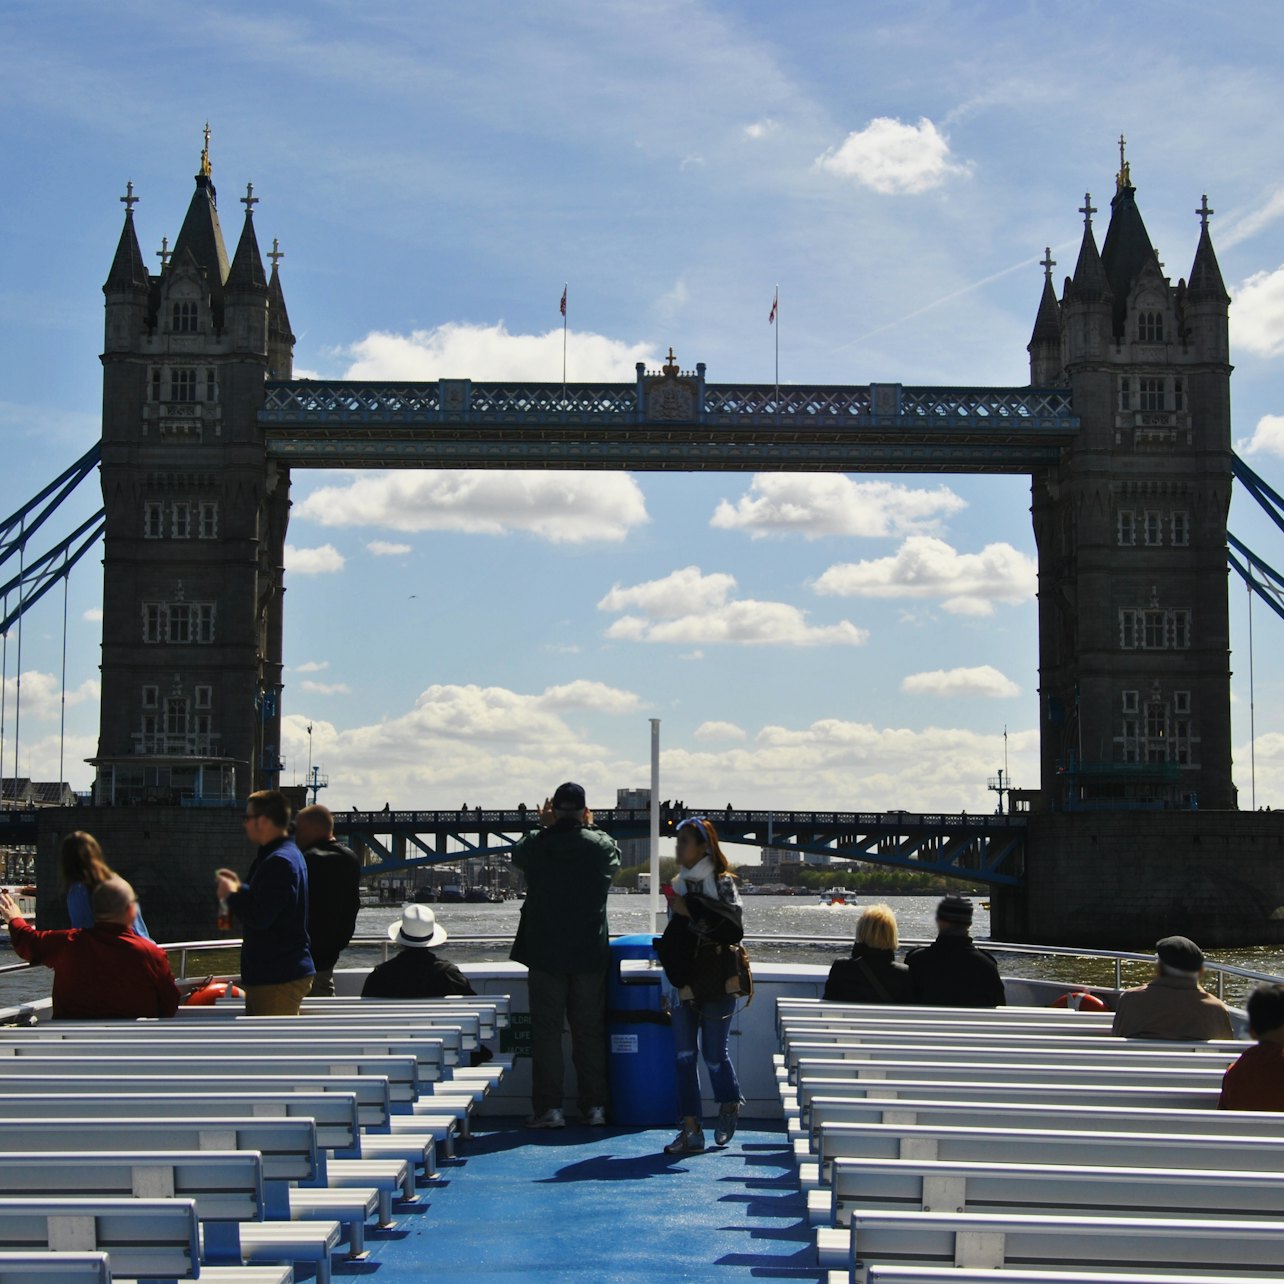 Thames Cruise: Westminster to Tower of London - Accommodations in London